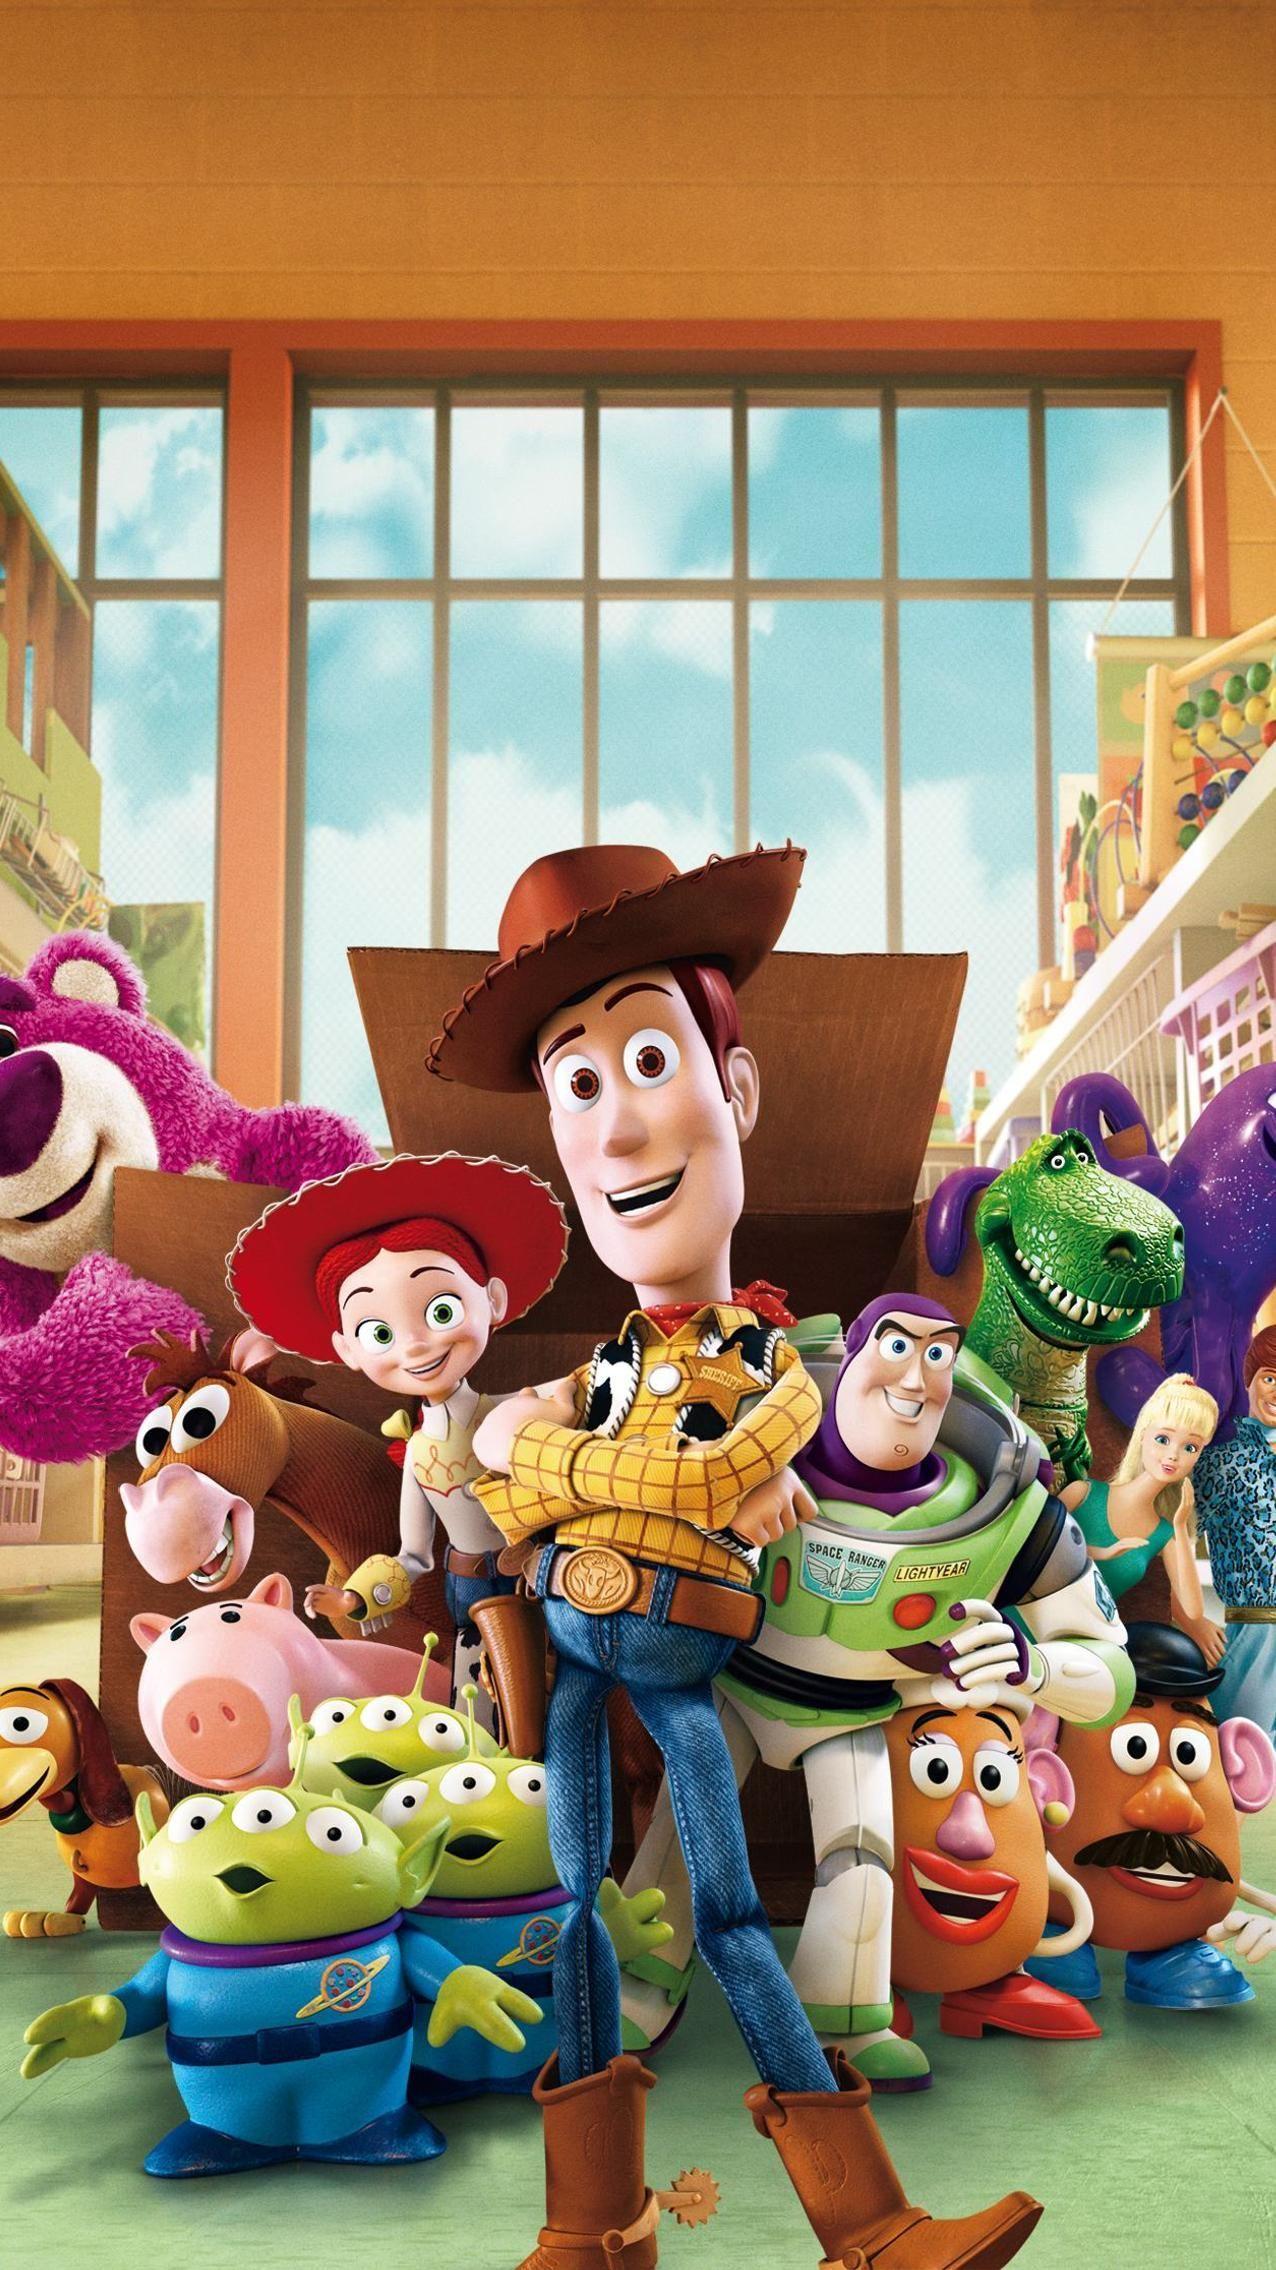 Toy Story 3 download the last version for iphone